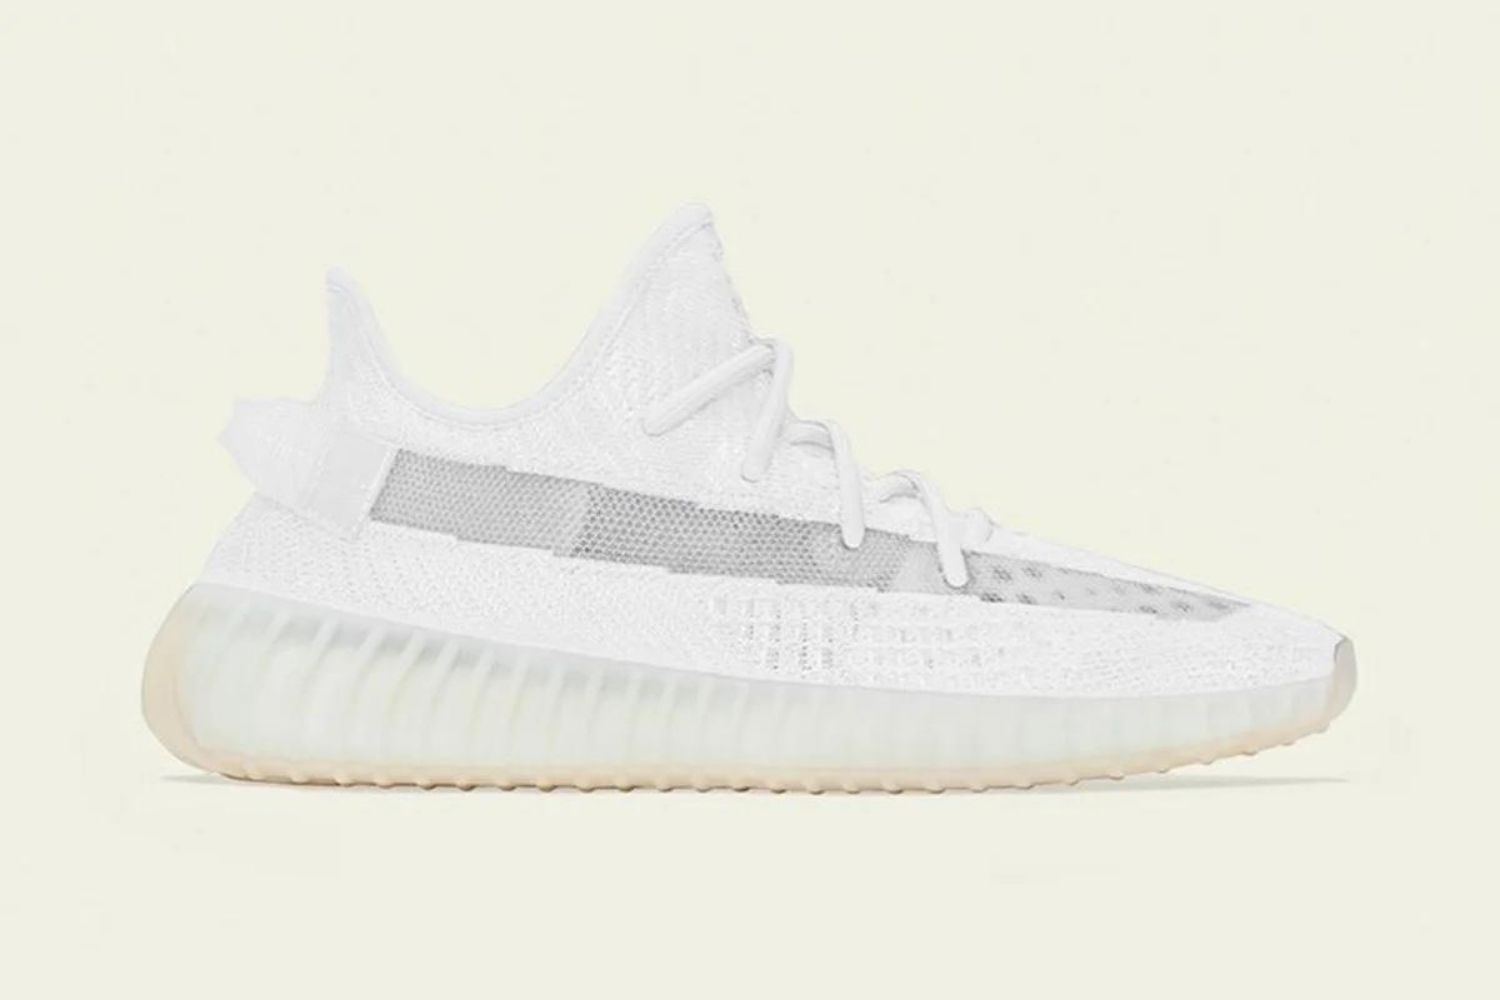 The adidas Yeezy 350 v2 comes in 'Cotton White' in 2022